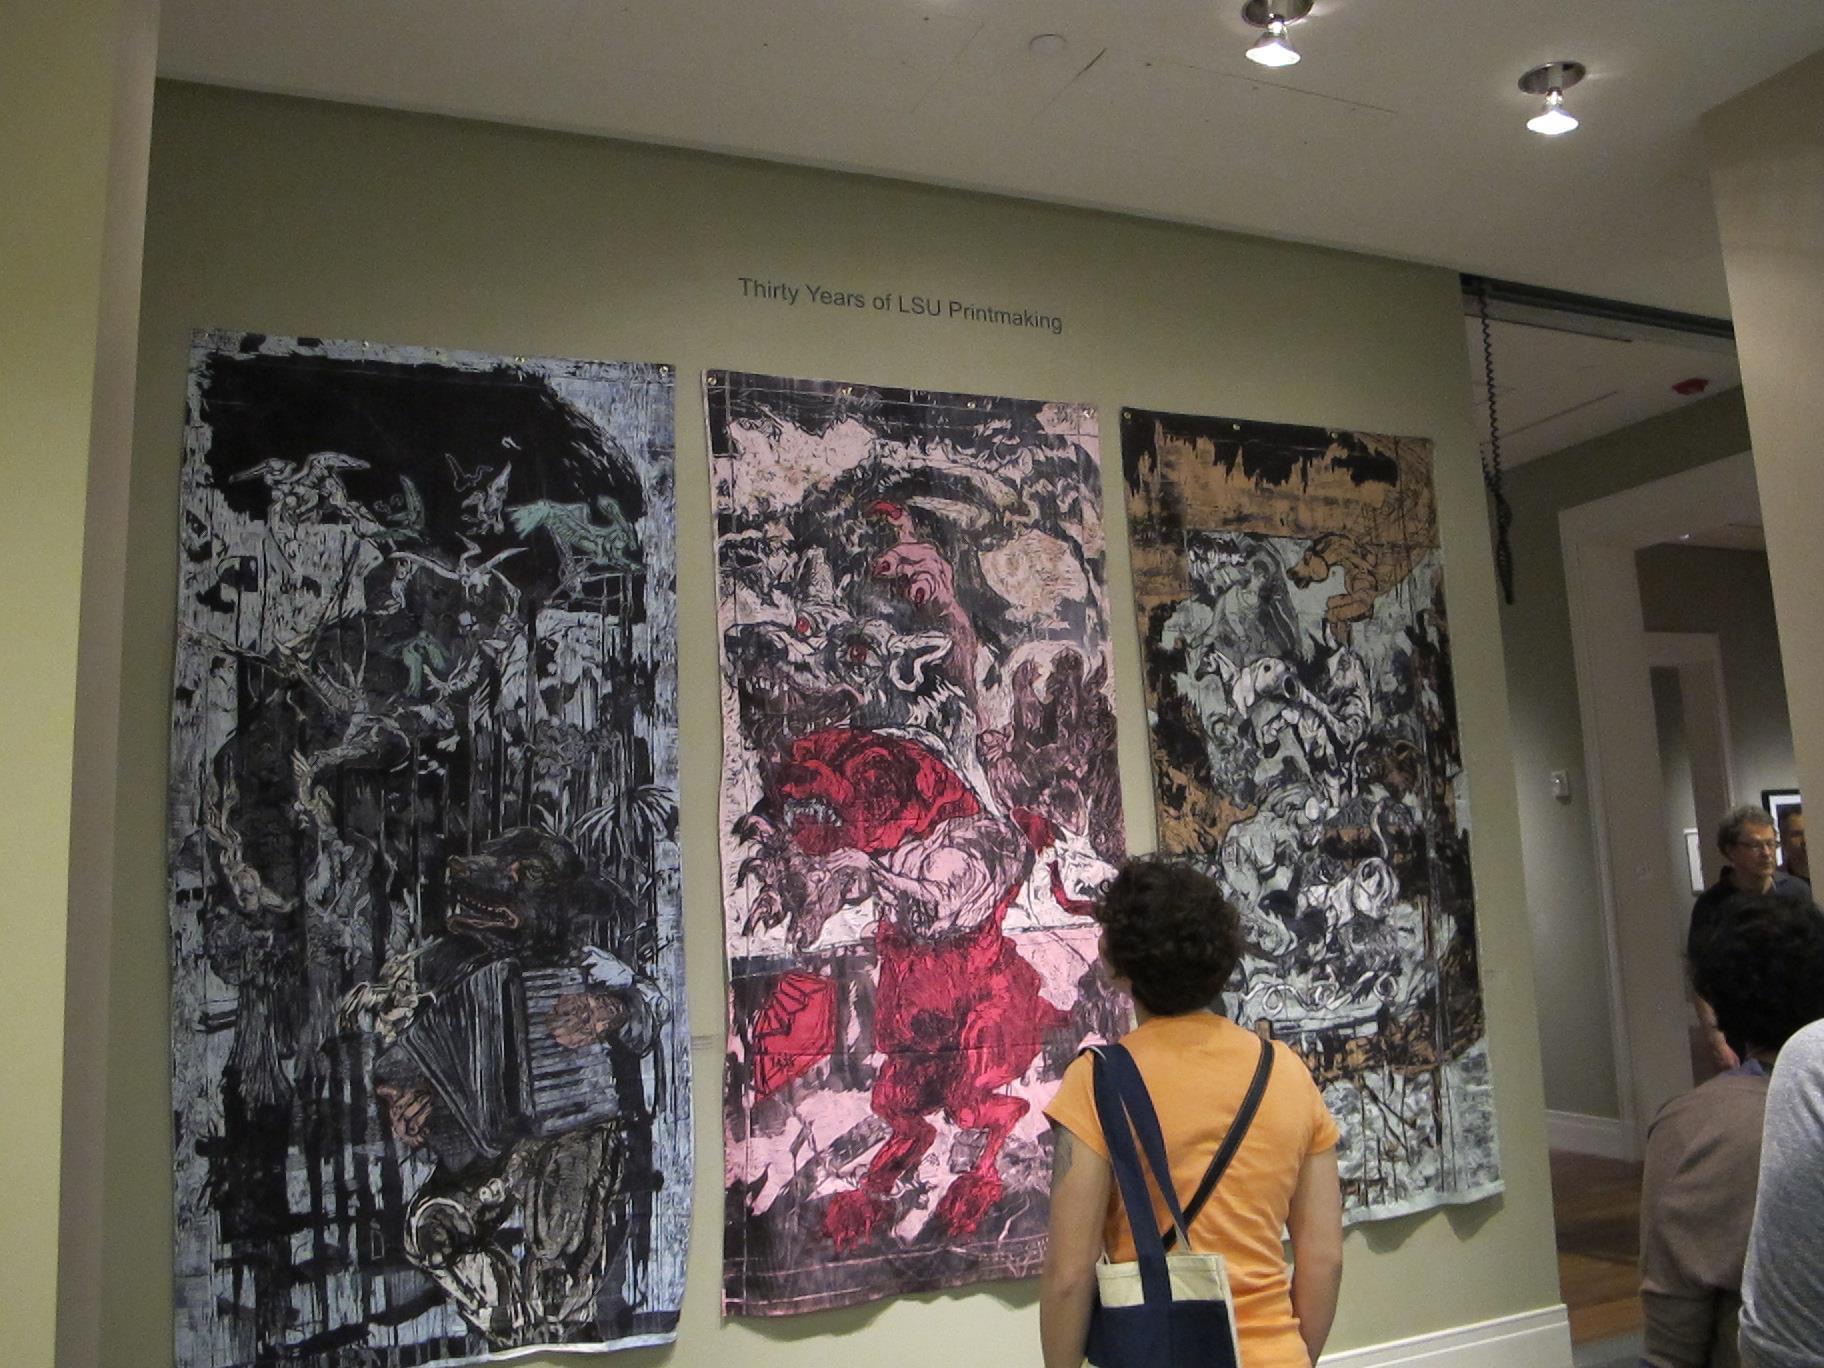 30 Years of LSU Printmaking, Ogden Museum of Southern Art, New Orleans, LA 2015